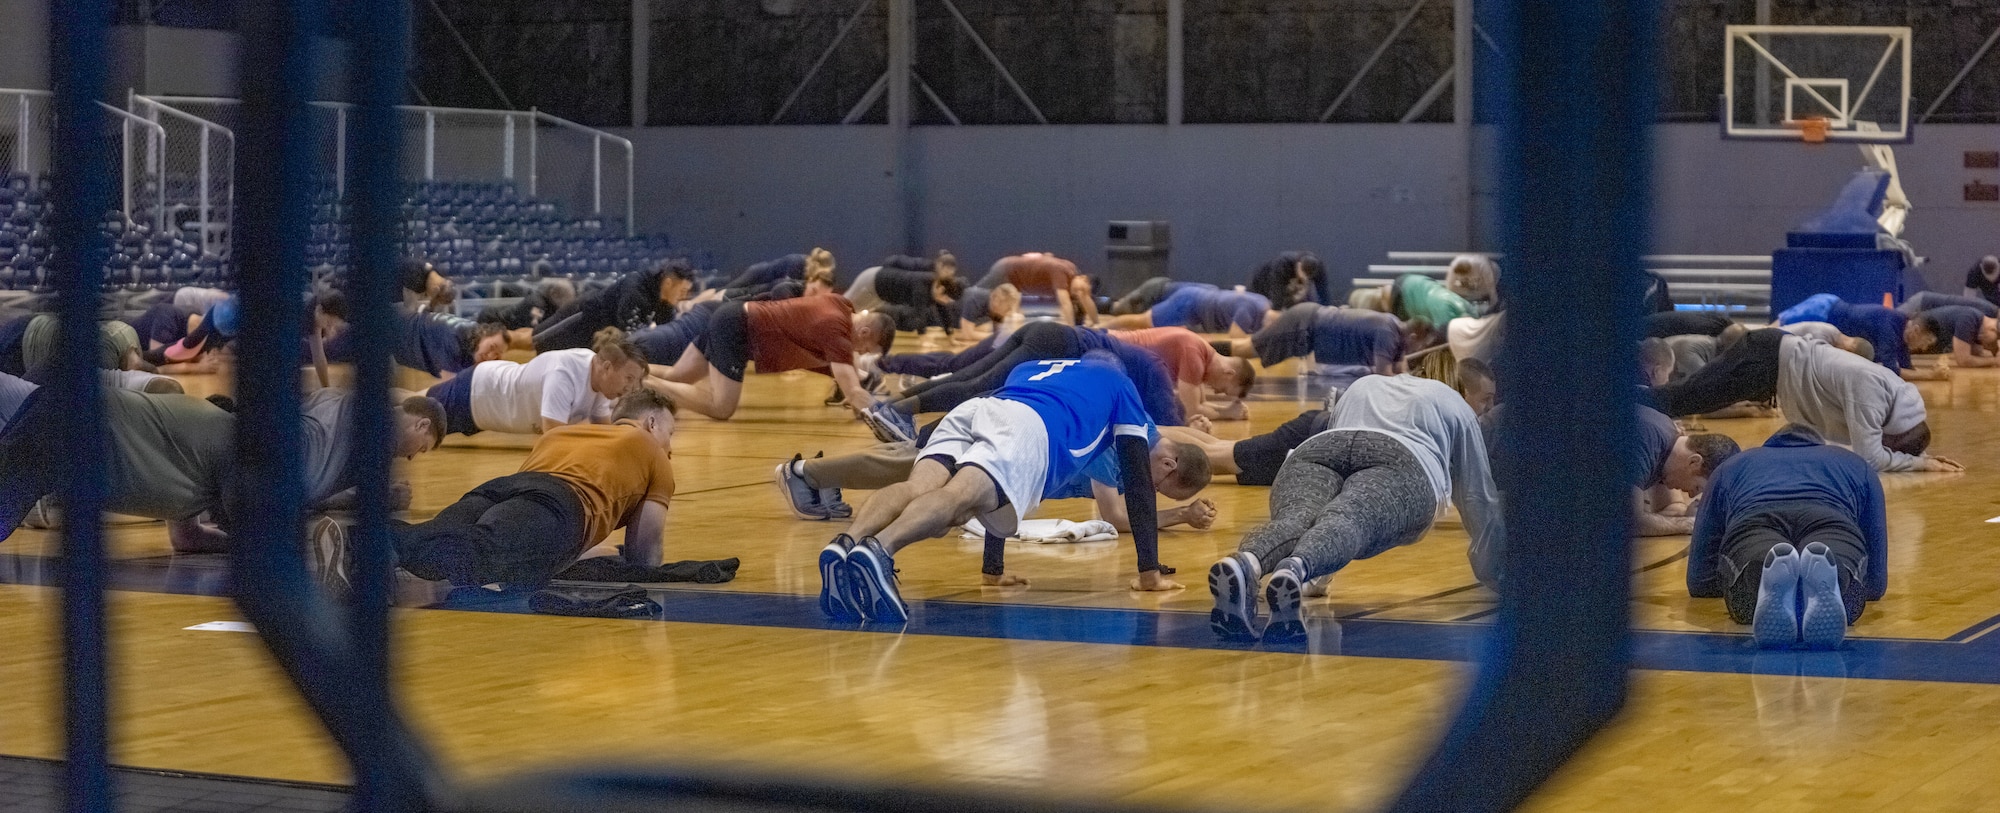 Students and instructors from the Leadership Development Course participate in a valor workout on Dec. 8, 2021, at Maxwell Air Force Base, Alabama. The workout was designed to honor the service members and civilians killed in the Rooster 73 crash of 2010. (U.S. Air Force photo by Airman 1st Class Cody Gandy)